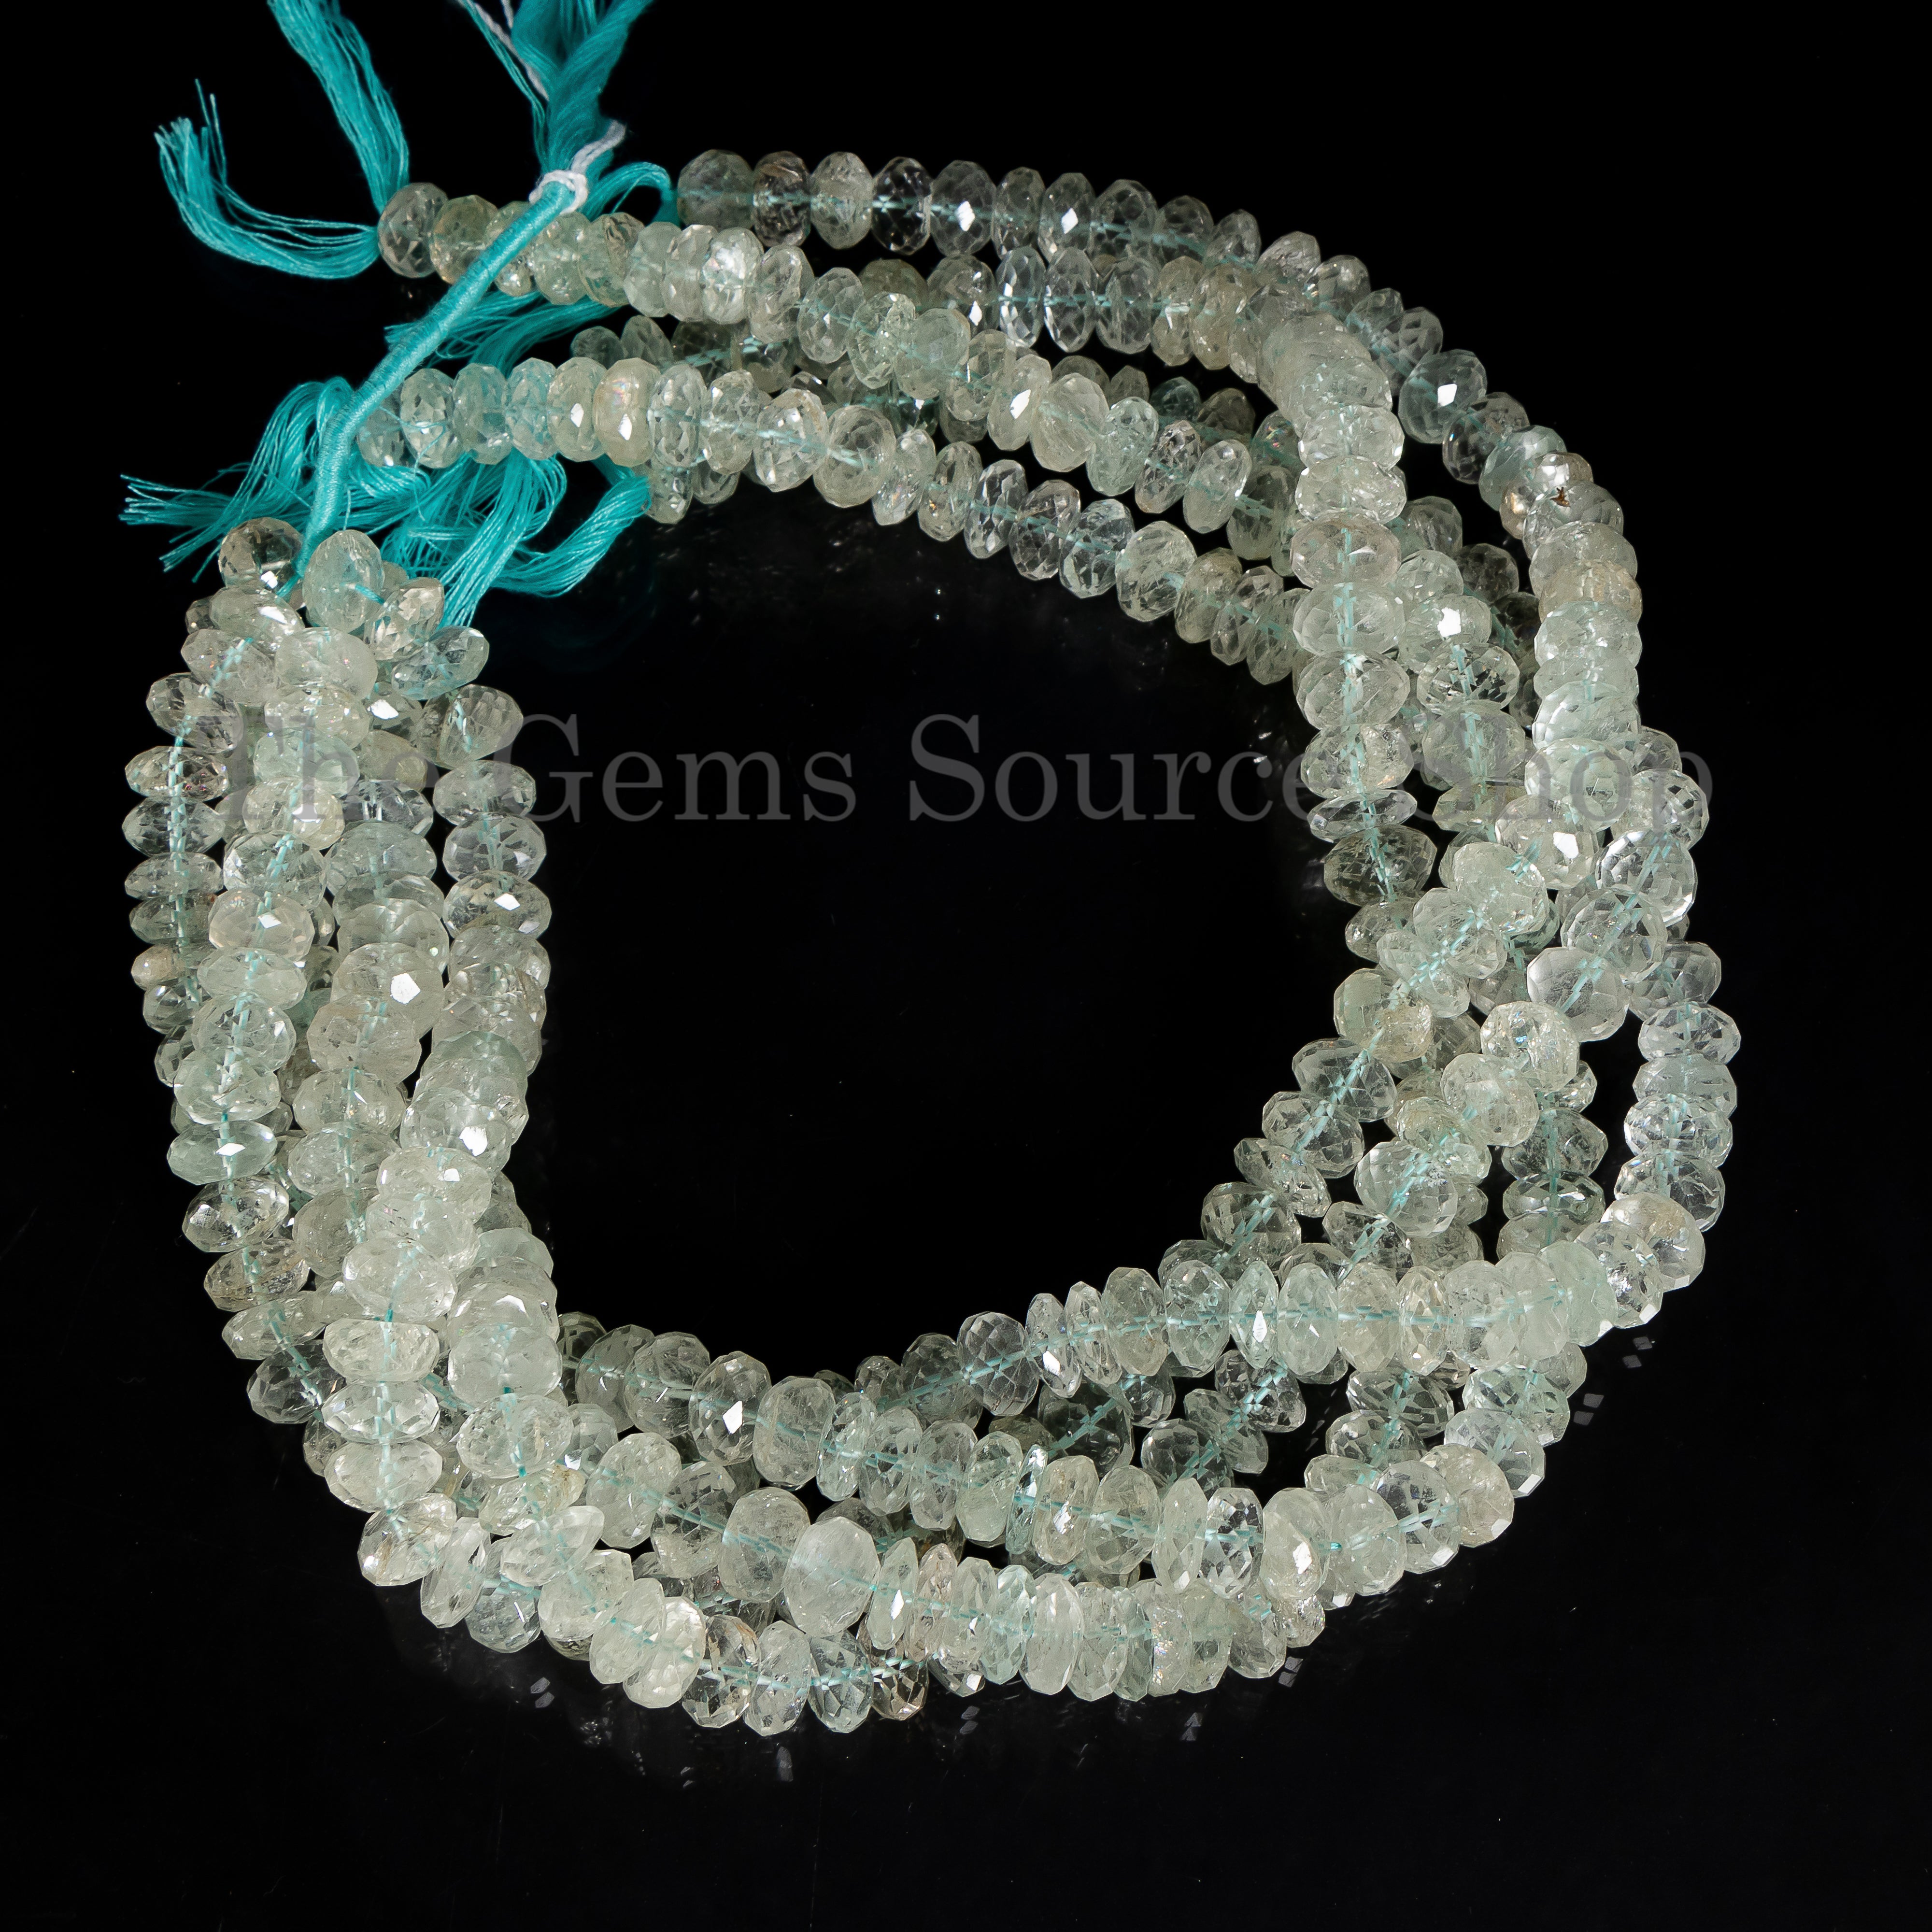 Aquamarine Faceted Rondelle Beads, Natural Aquamarine Gemstone Loose Beads for Jewelry Making.TGS-5141